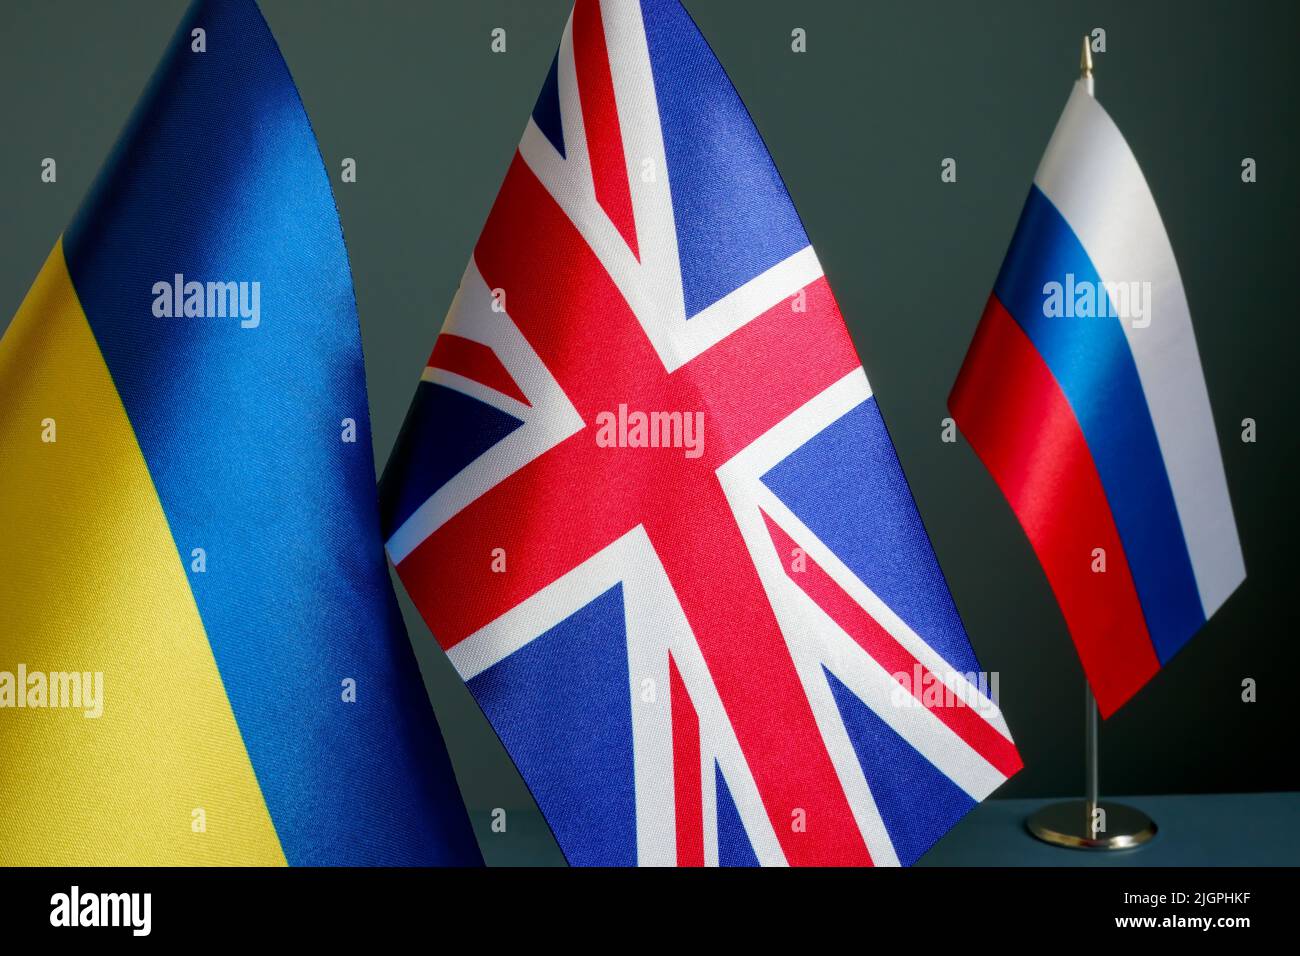 The flags of Ukraine and Great Britain are far from the flag of Russia. Stock Photo